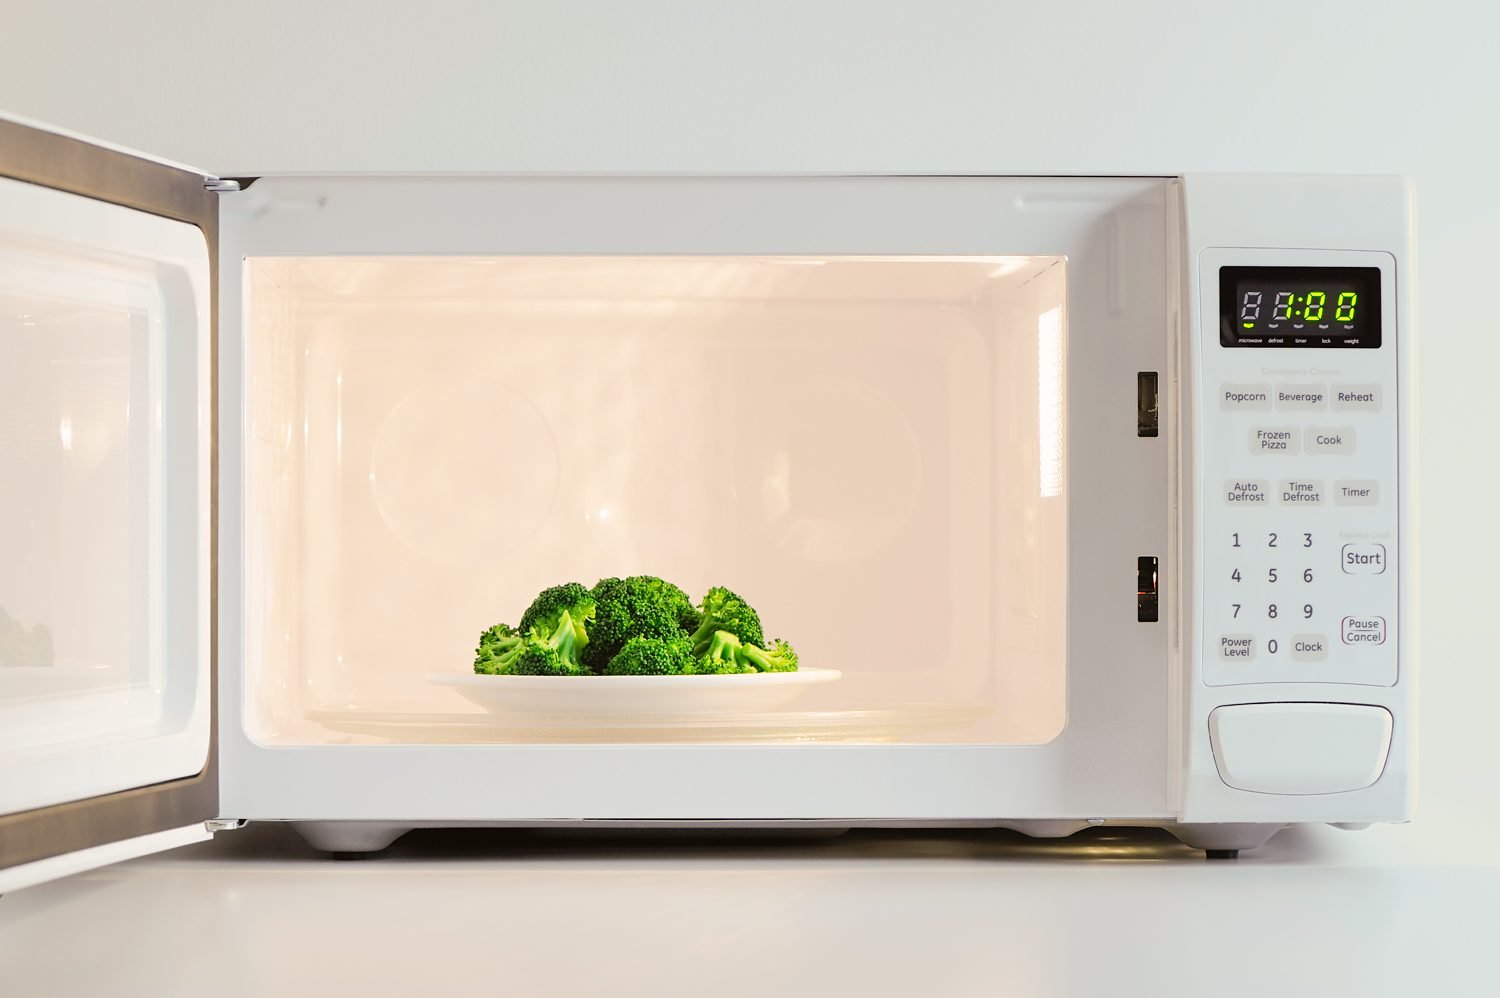 Things you need to know about microwave ovens